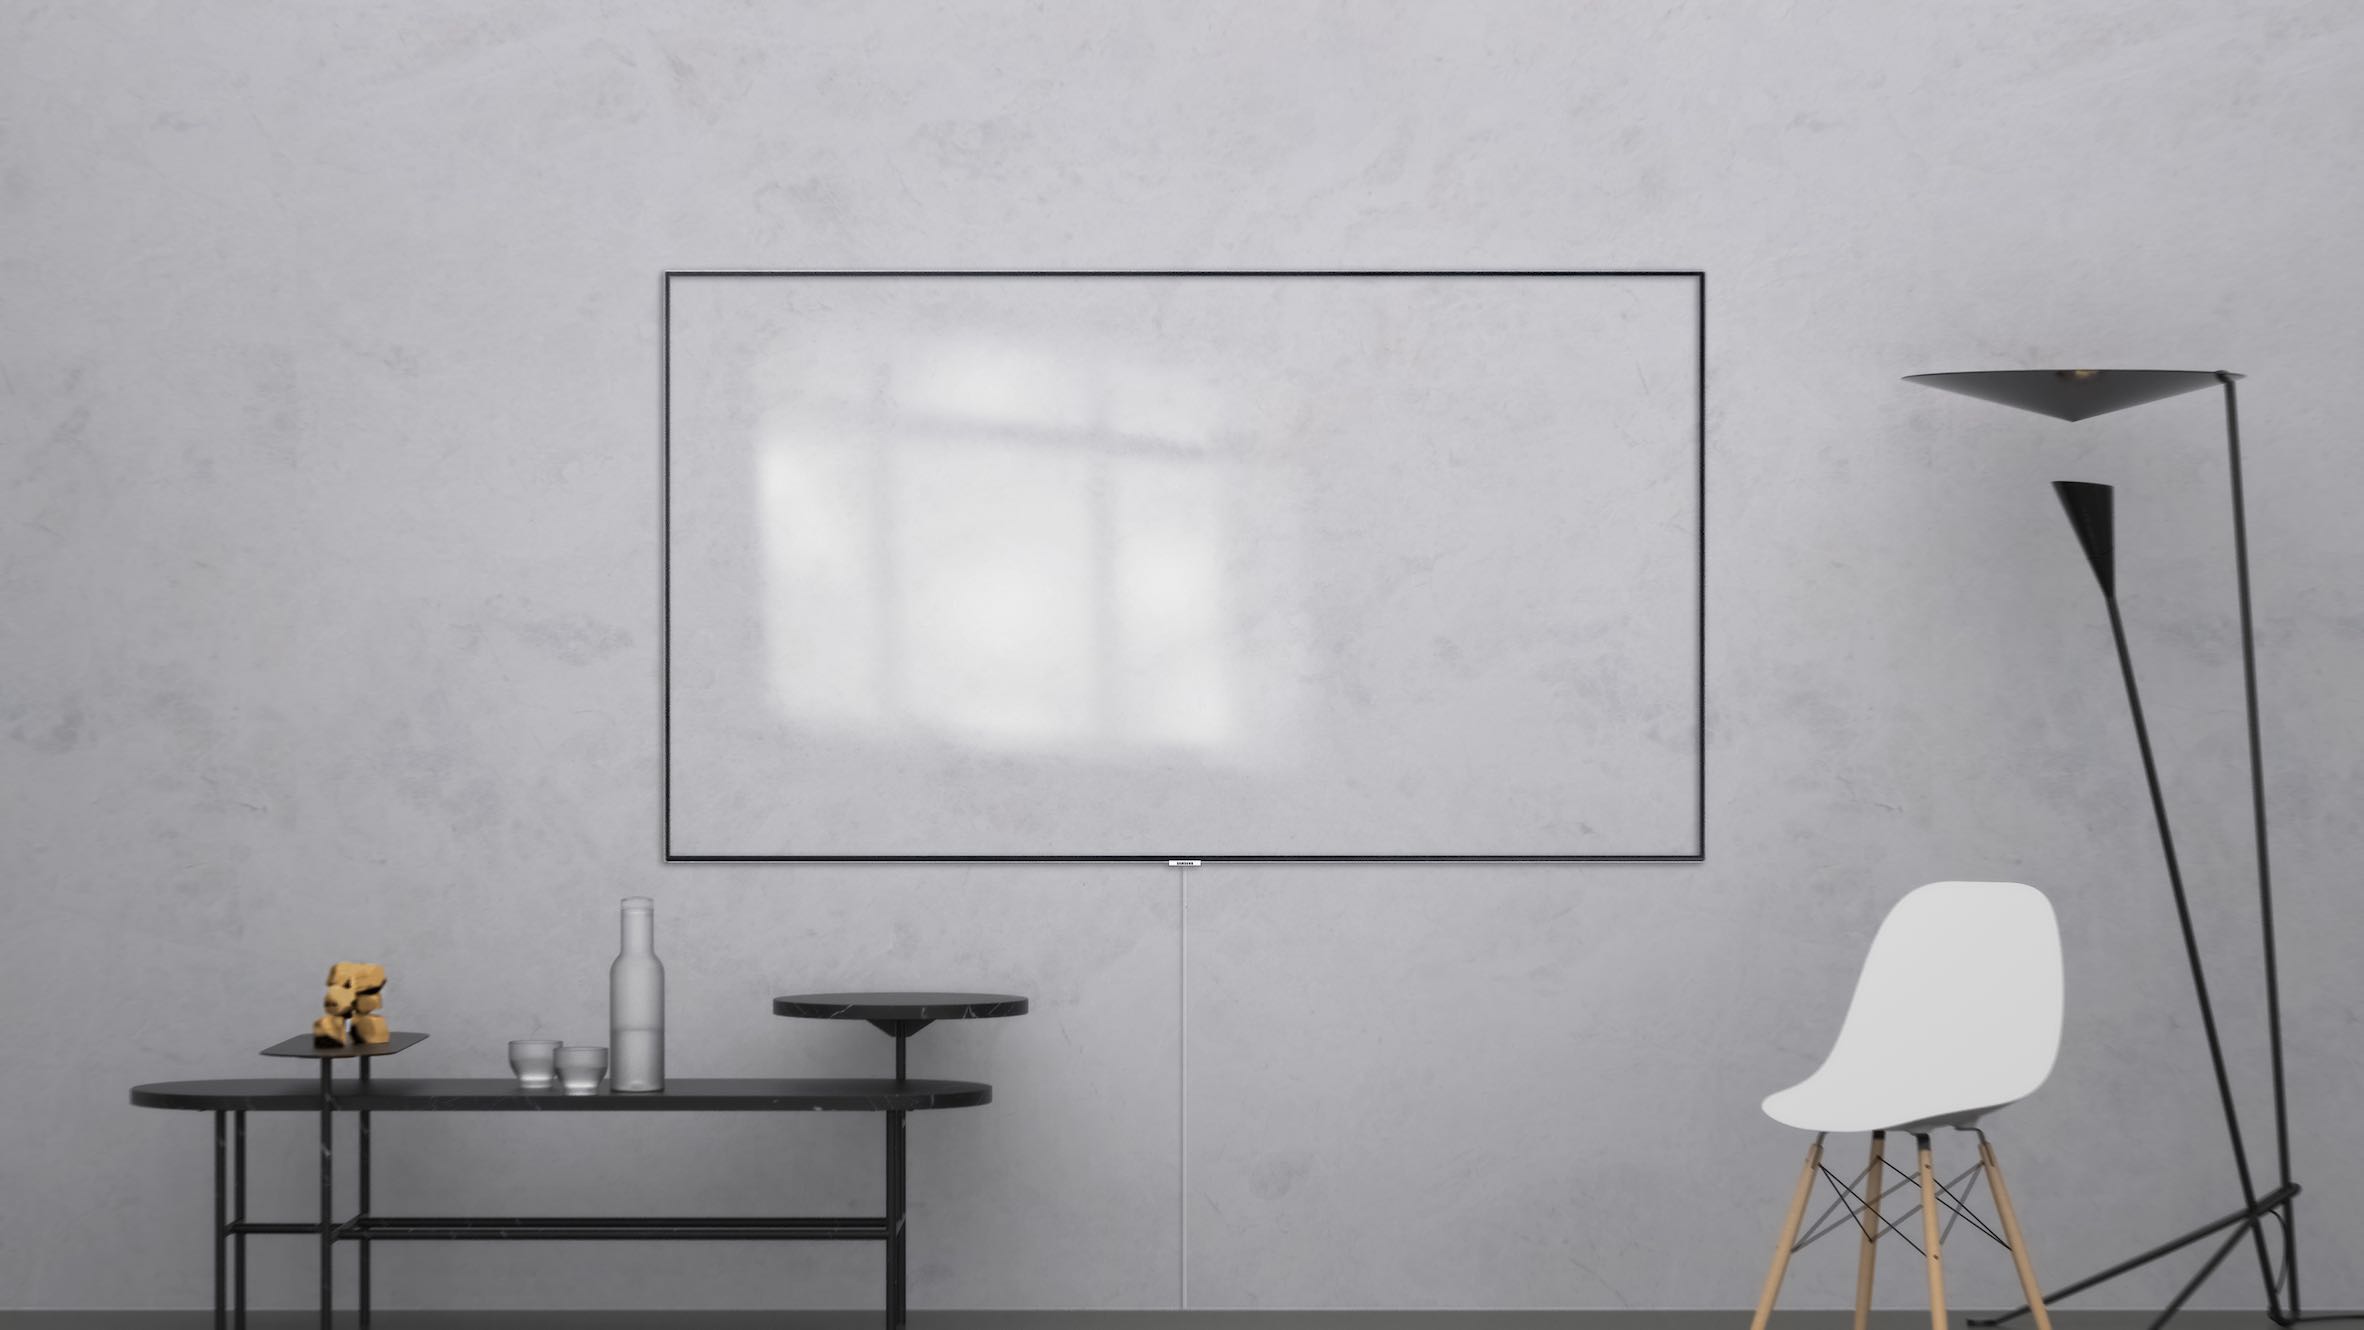 Alight is on the longlist for the Dezeen x Samsung TV Ambient Mode design competition